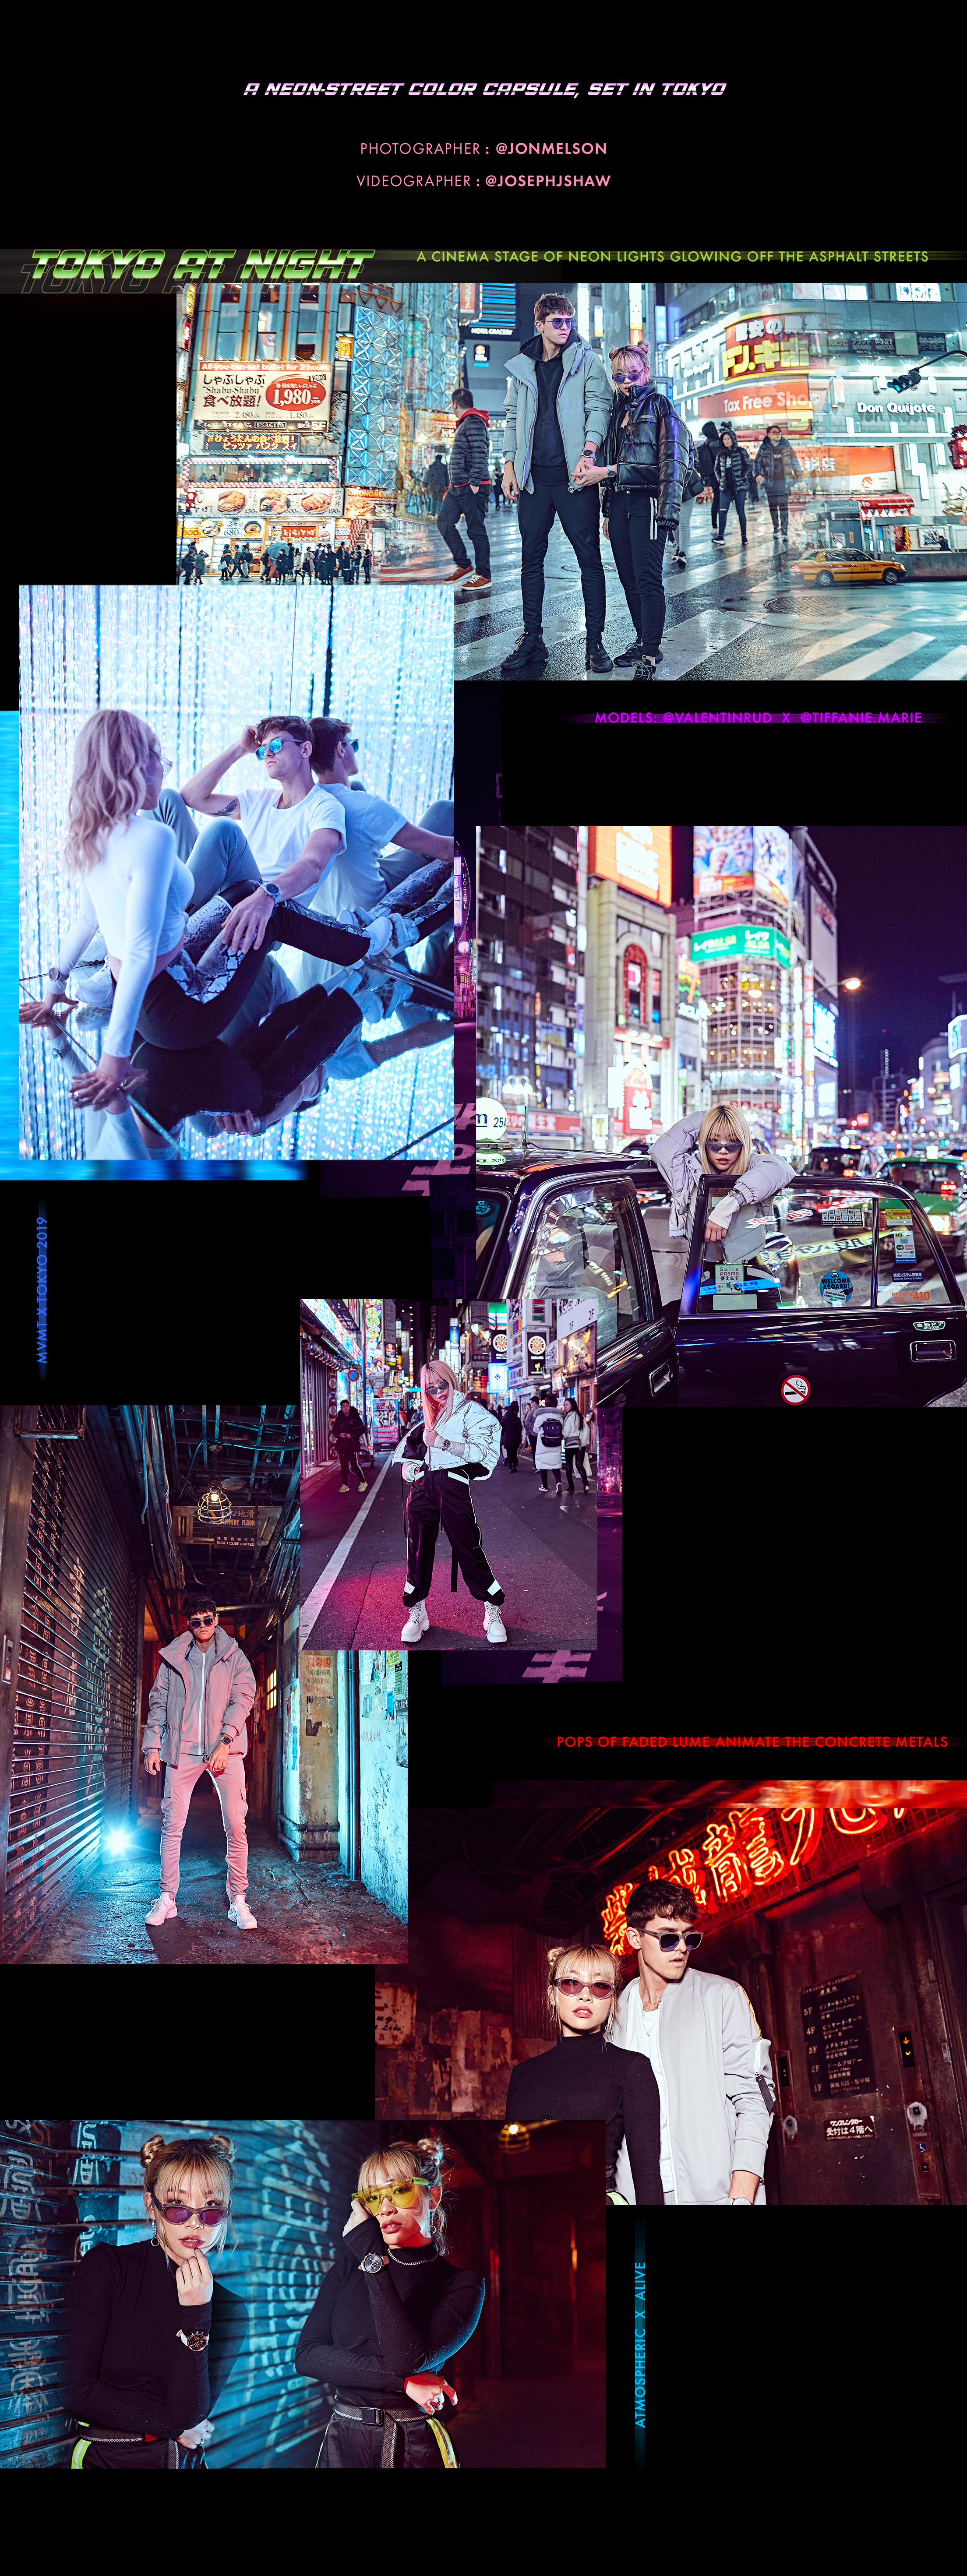 A neon-street color capsule, set in Tokyo. Photographer: @jonmelson. Videographer: @josephjshaw. Tokyo at night. A cinema stage of neon lights glowing off the asphalt streets. Models: @valentinrud x @tiffanie.marie. Pops of faded lume animate the concrete metals. Atmospheric x alive